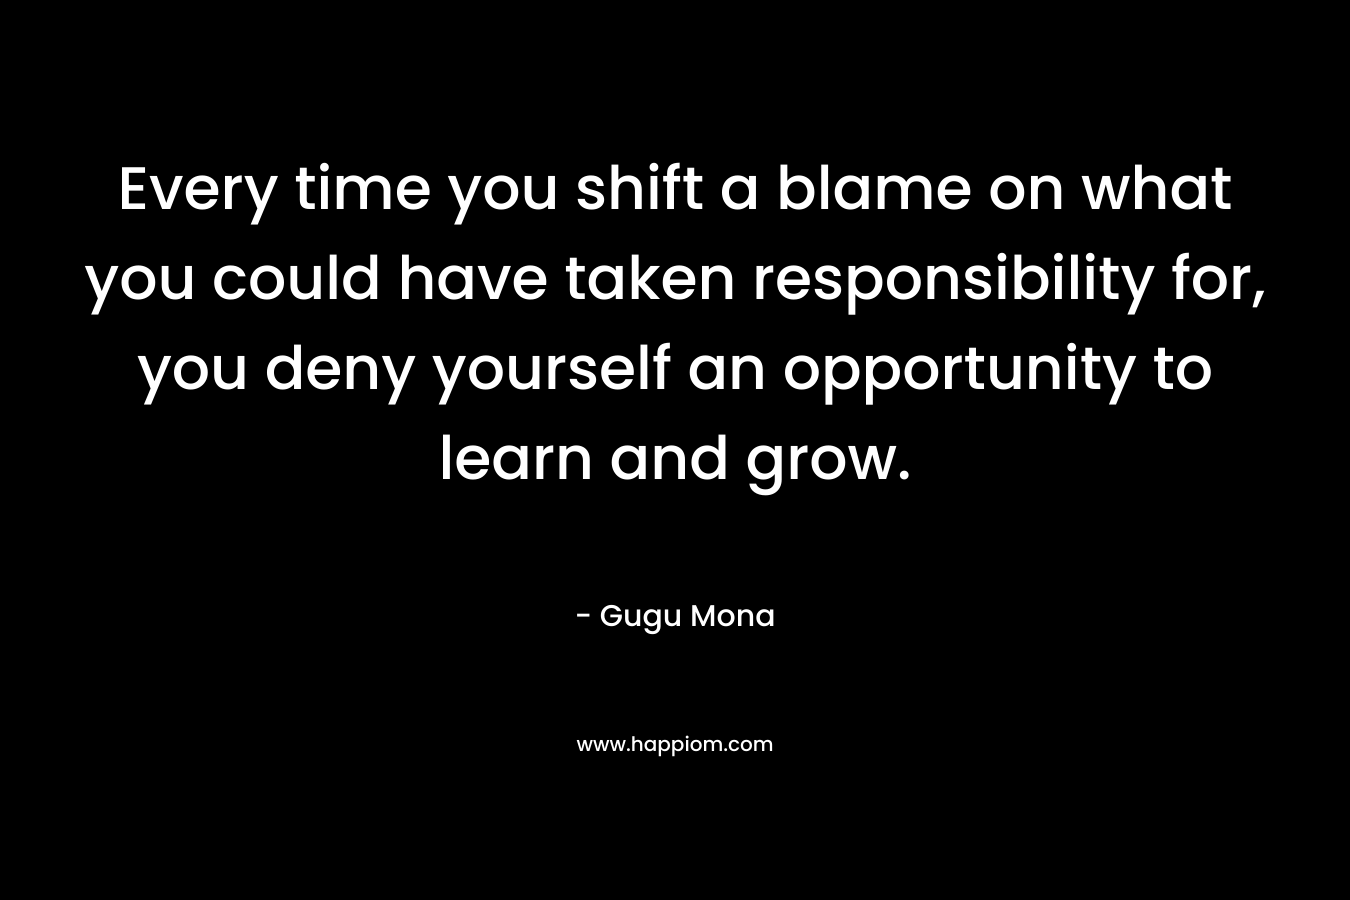 Every time you shift a blame on what you could have taken responsibility for, you deny yourself an opportunity to learn and grow. – Gugu Mona